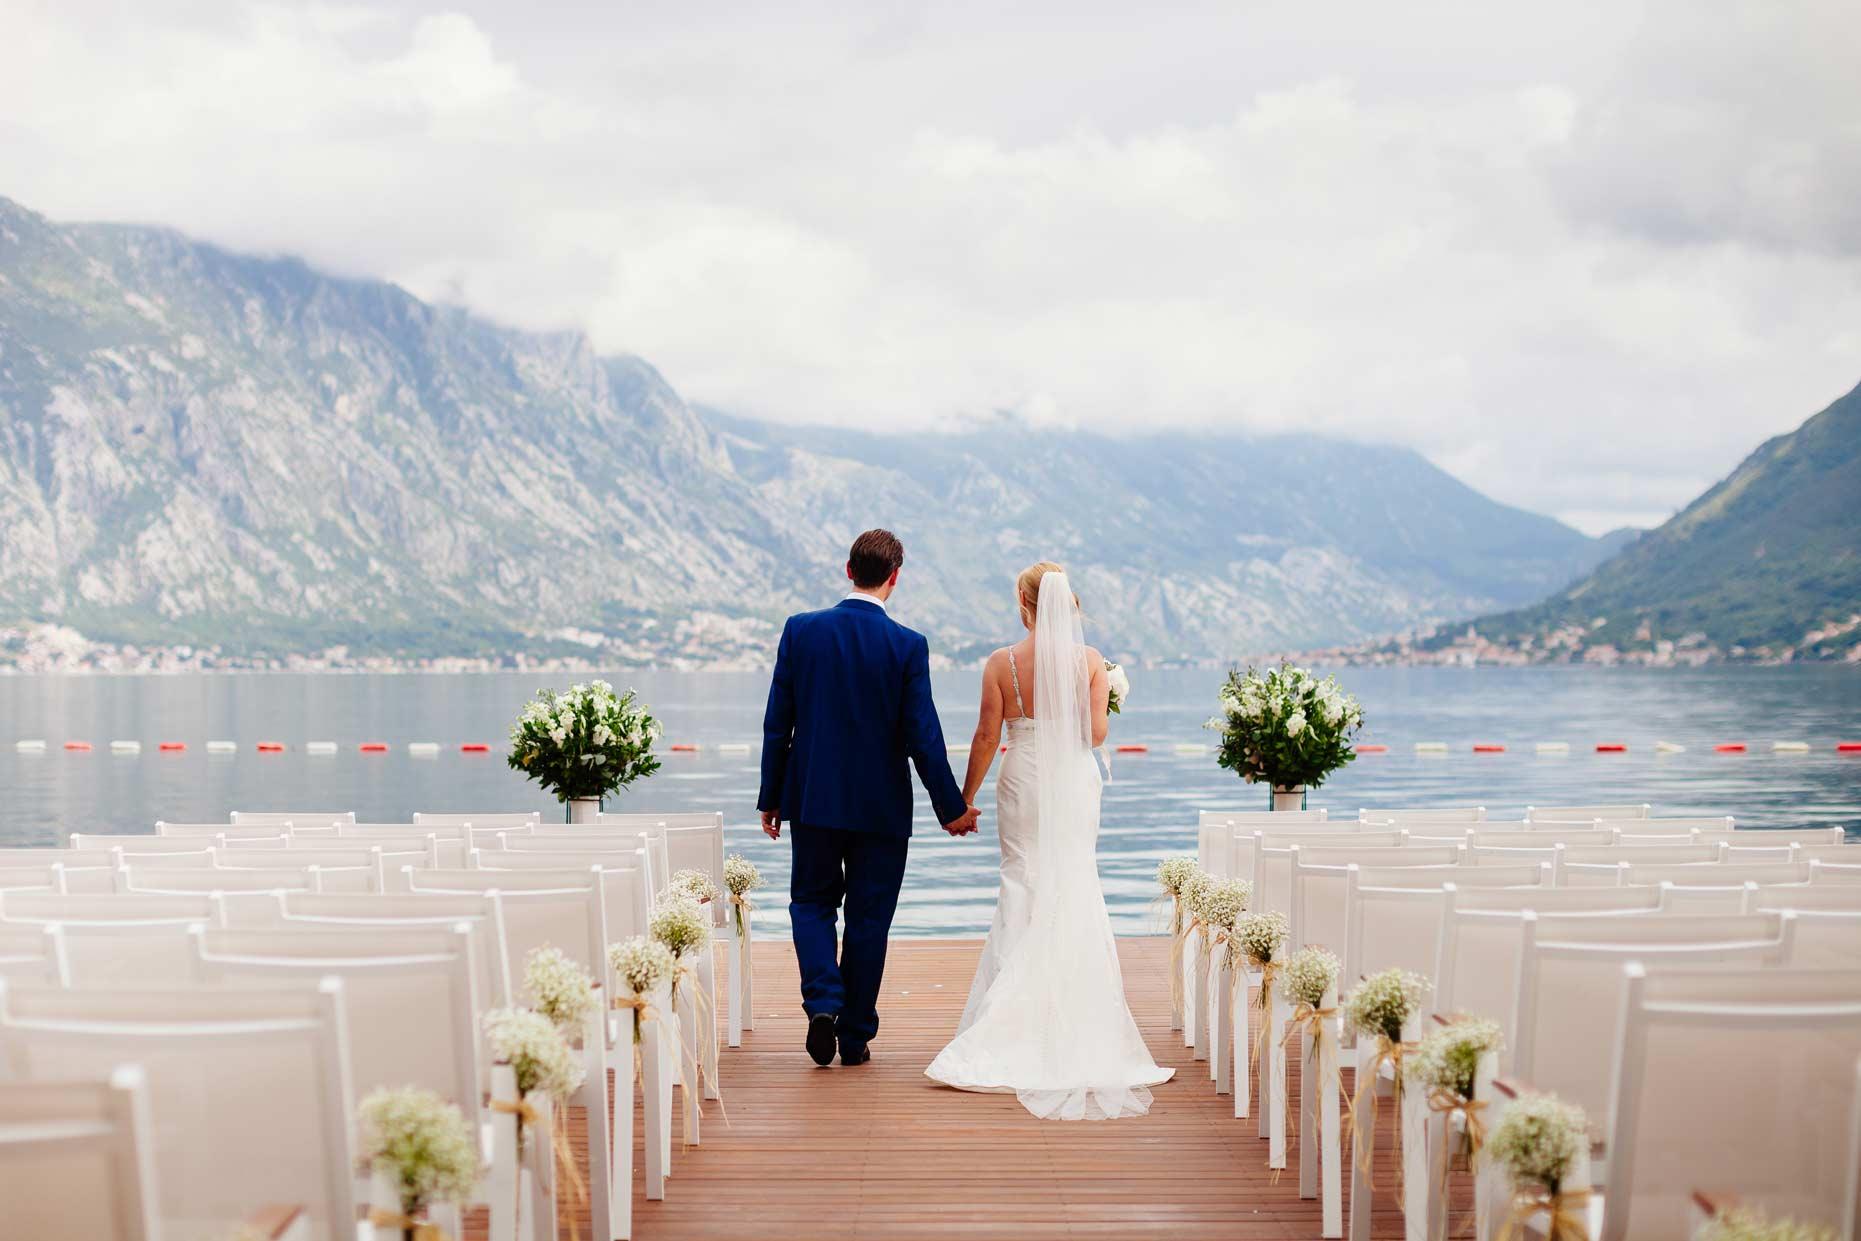 D:\Работа\SEO\GUEST POSTS\POSTS 2019\15.07.2019\Ryan 10 Tips for Planning a Destination Wedding\how-to-plan-a-destination-wedding-newlyeds-outdoor-wedding.jpg